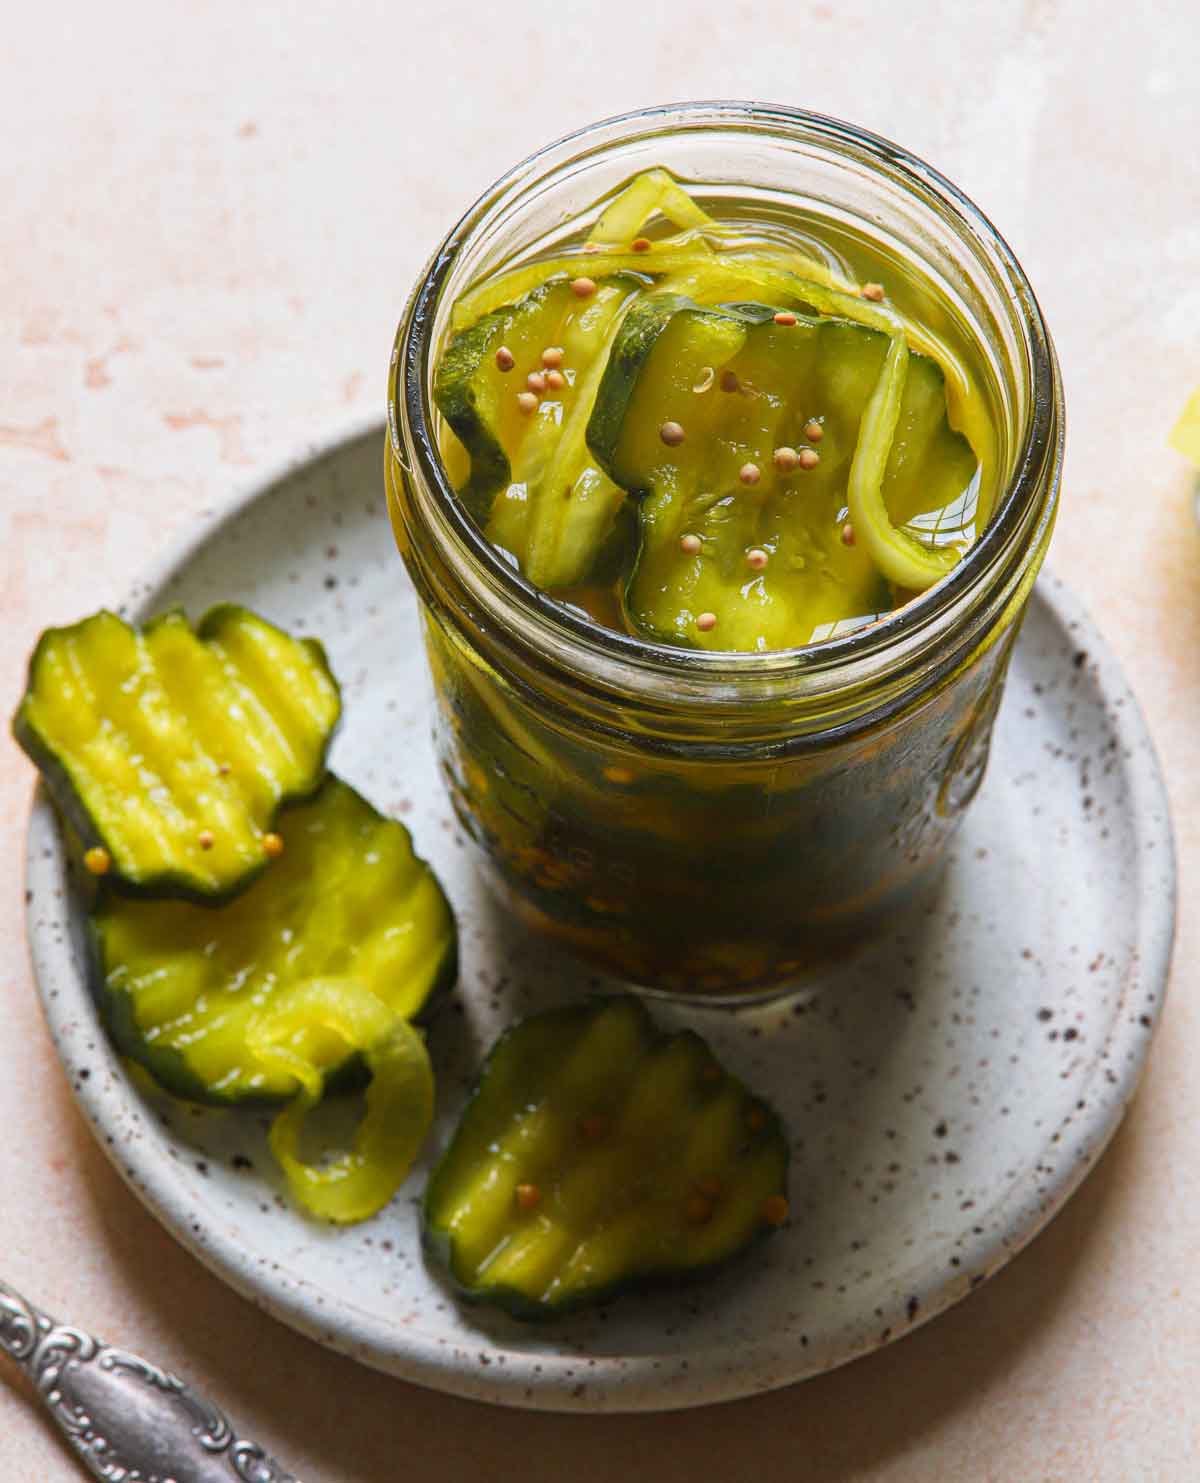 Open jar of bread and butter pickles on a plate with three pickle slices in view.